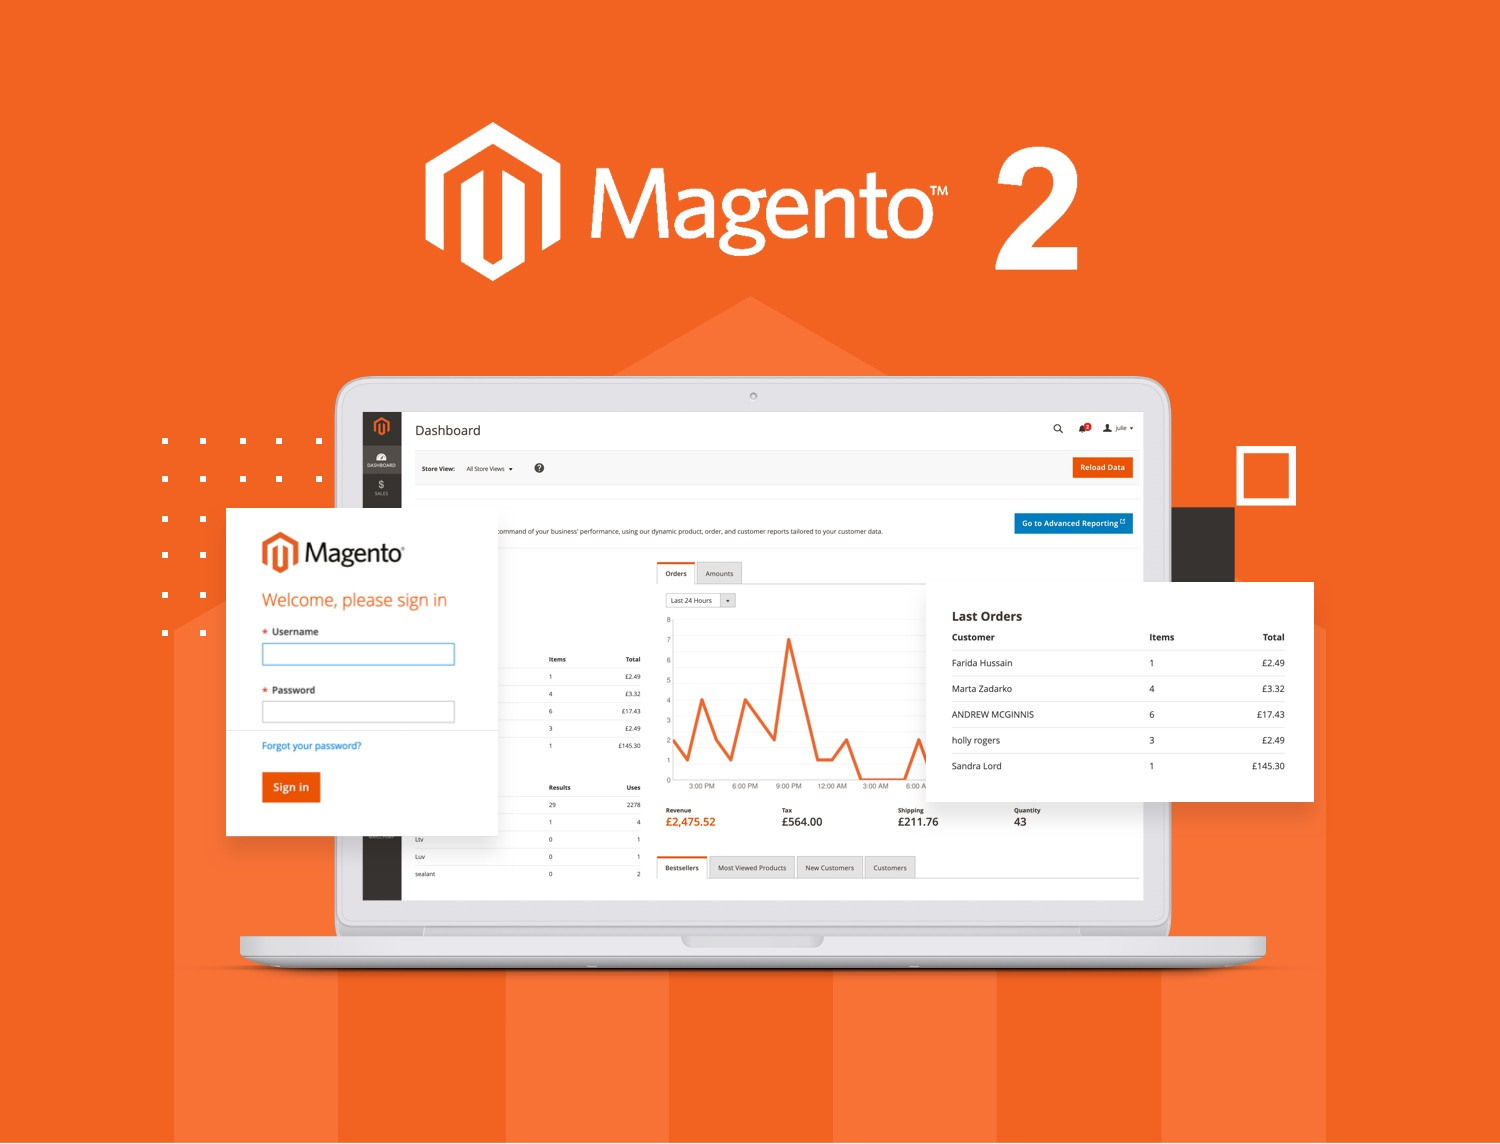 Why Migrate from Magento 1 to Magento 2